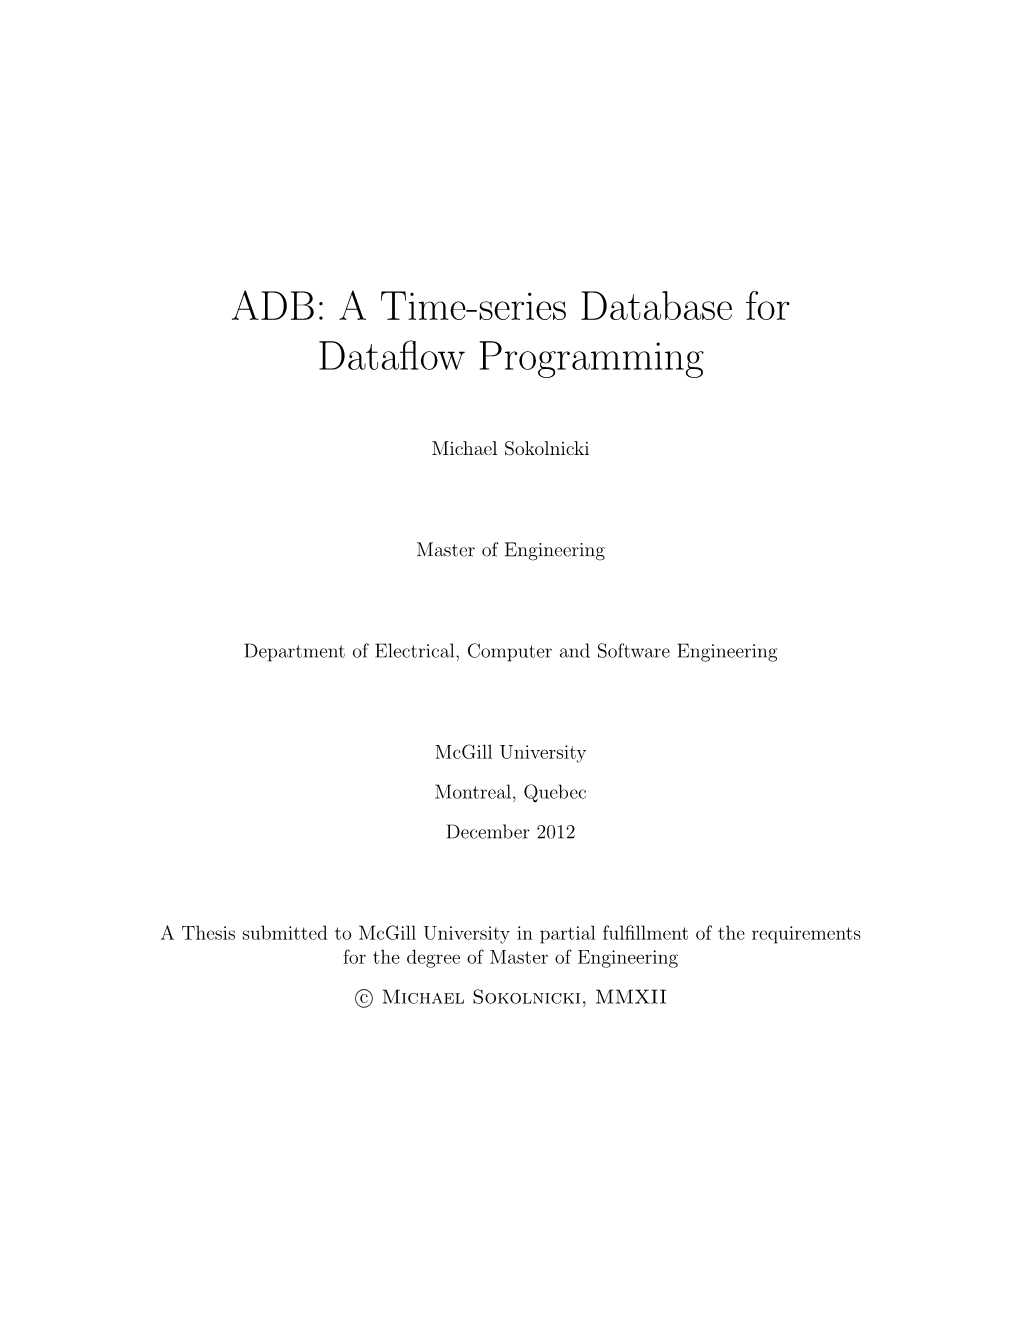 ADB: a Time-Series Database for Dataflow Programming